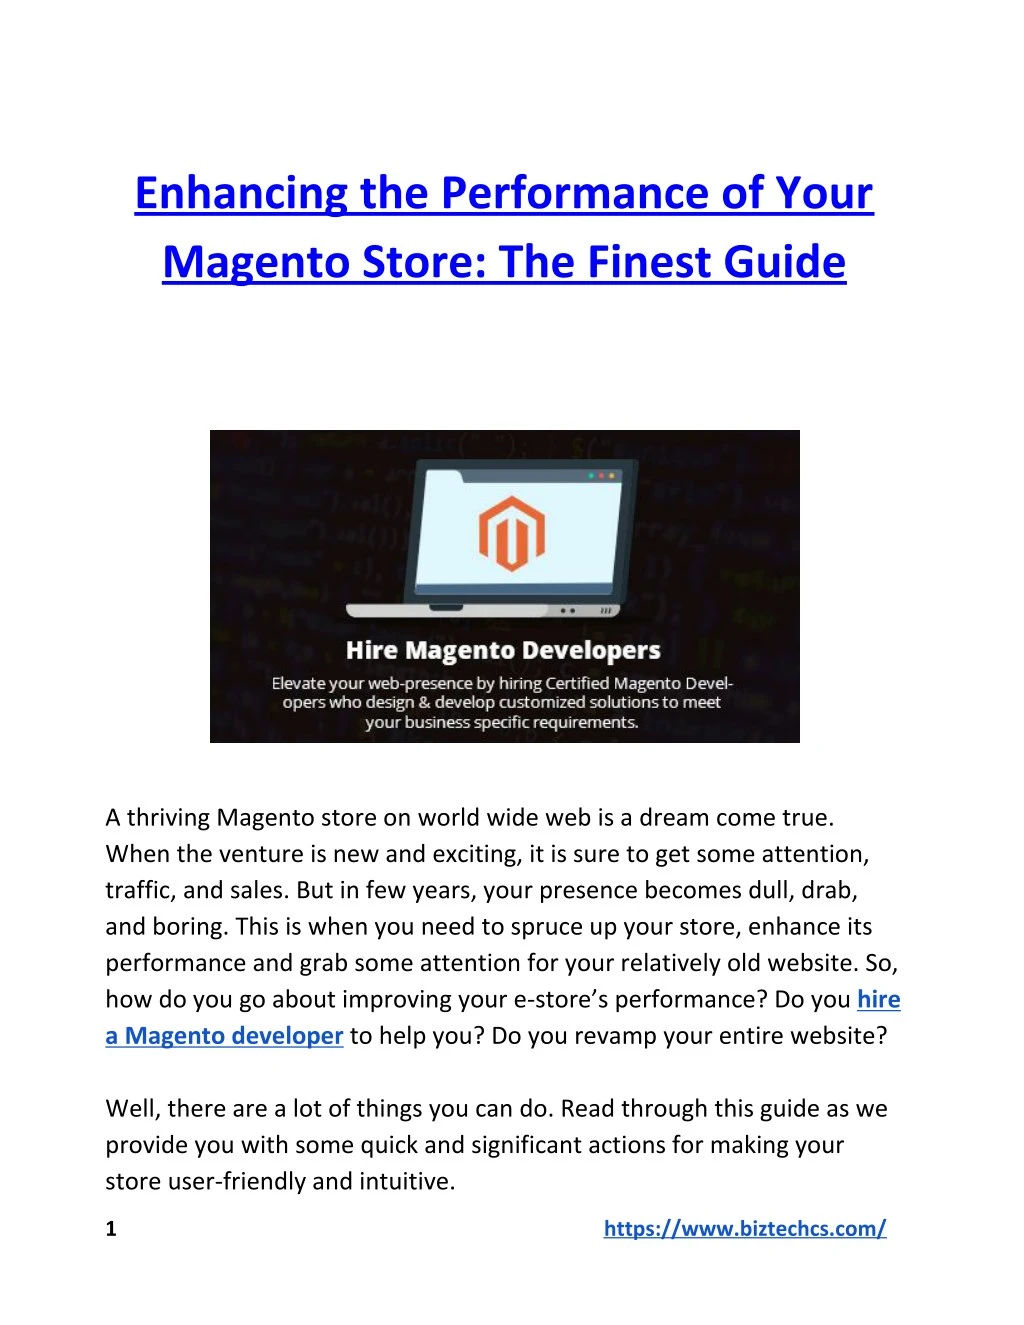 enhancing the performance of your magento store